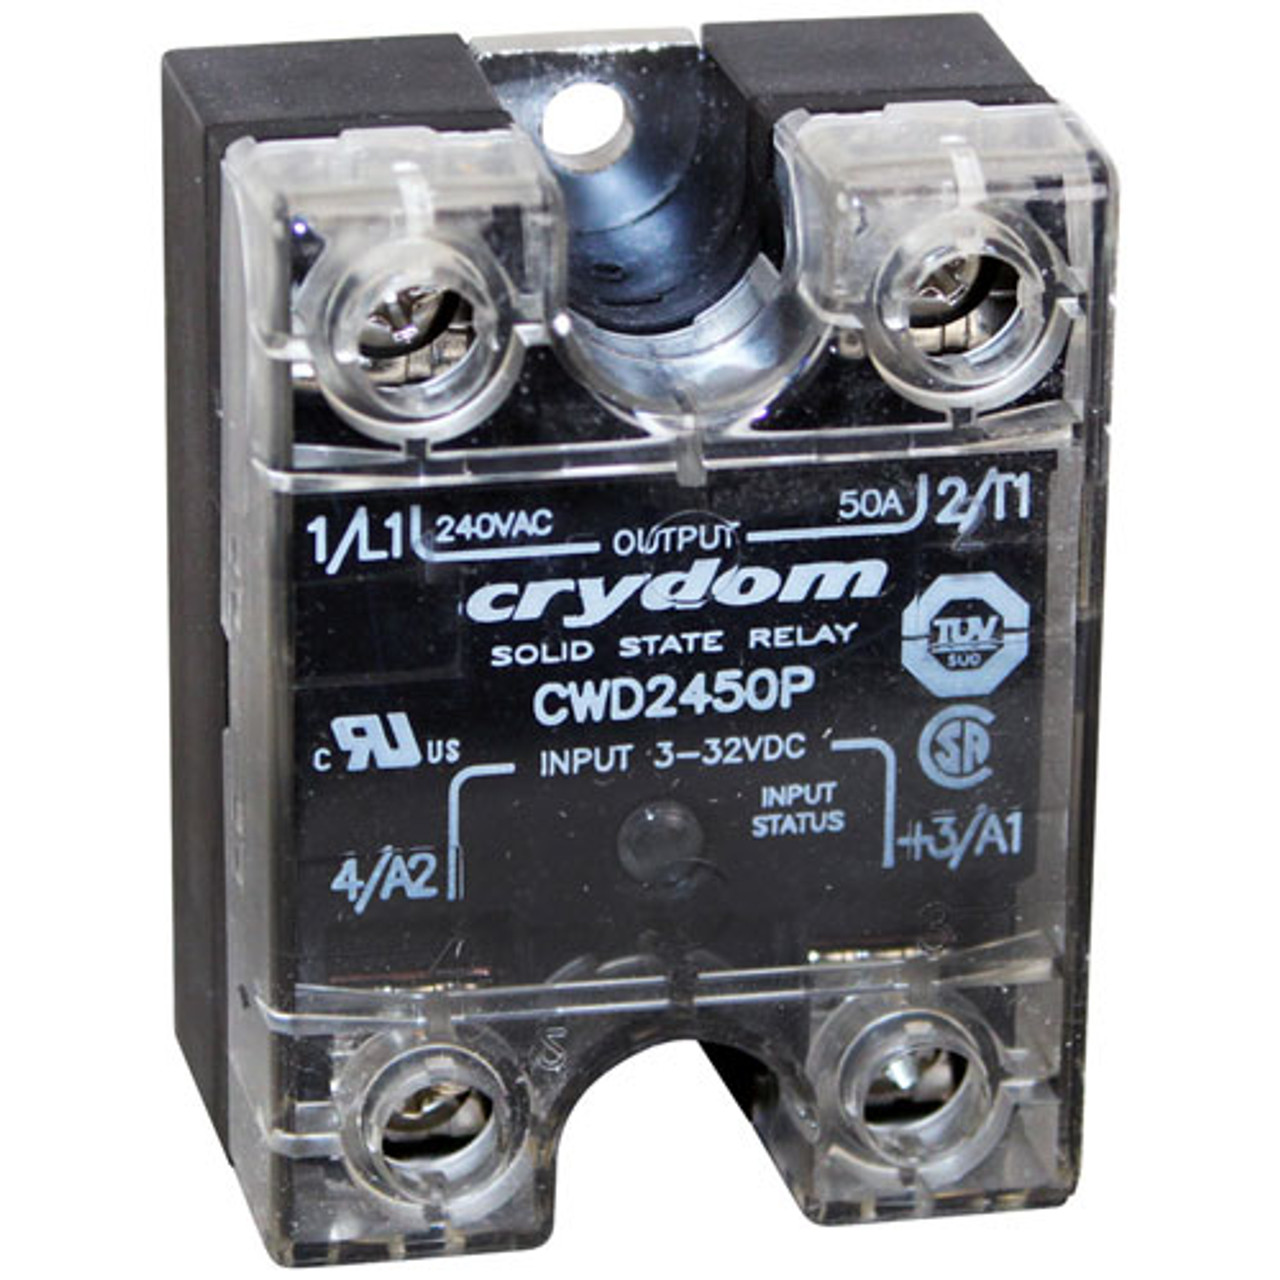 Ssr-50Amp Relay - Replacement Part For Frymaster 807-4057